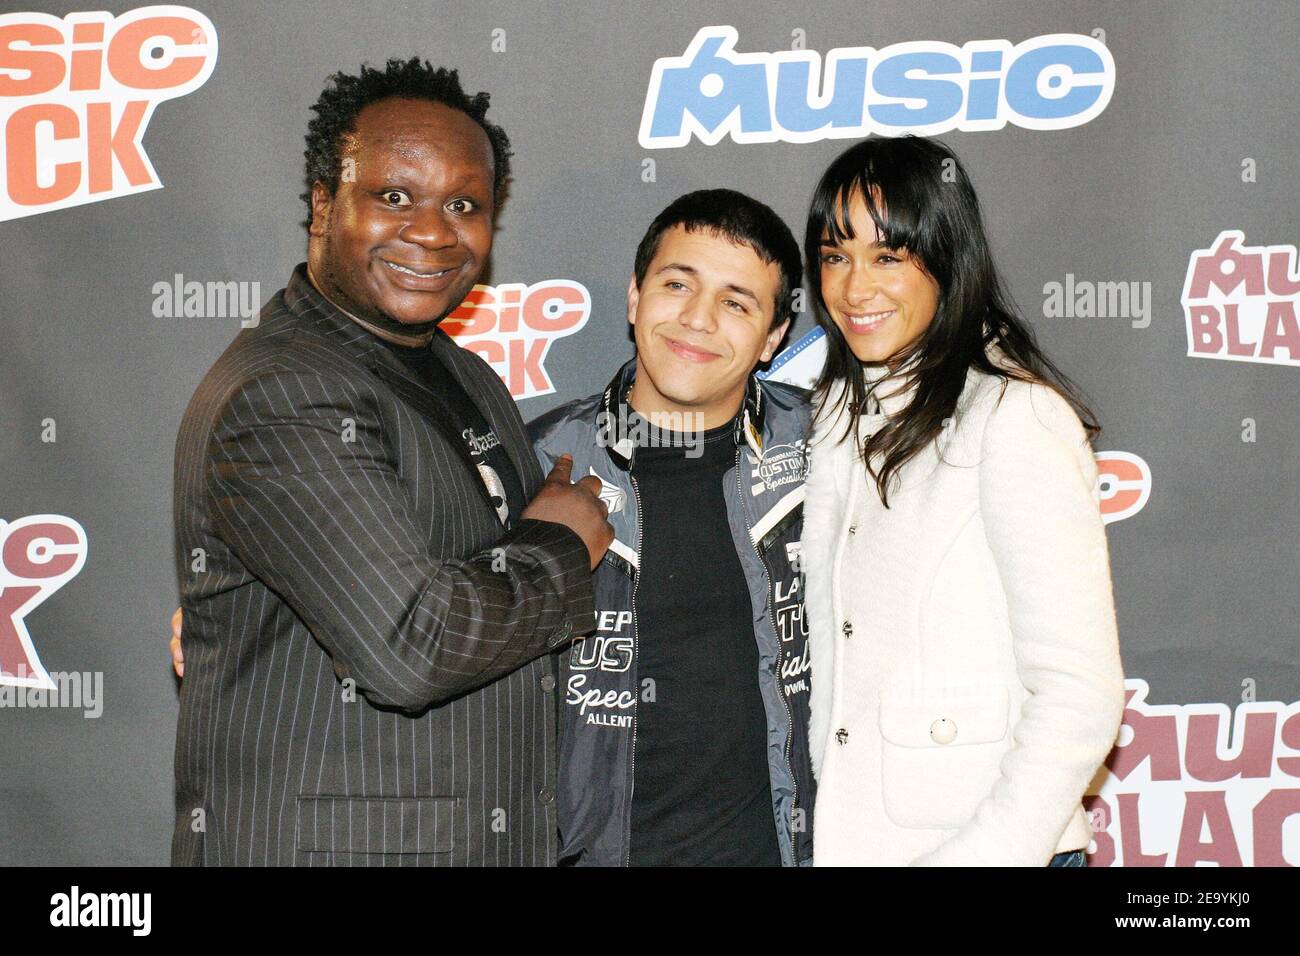 (L-R) French TV presenter Magloire, Rai singer Faudel and TV presenter Karine Lima attend the launch party for M6' new TV channels 'M6 Rock' and 'M6 Black' at Salle Wagram in Paris, France, on January 10, 2005. Photo by Benoit Pinguet/ABACA. Stock Photo